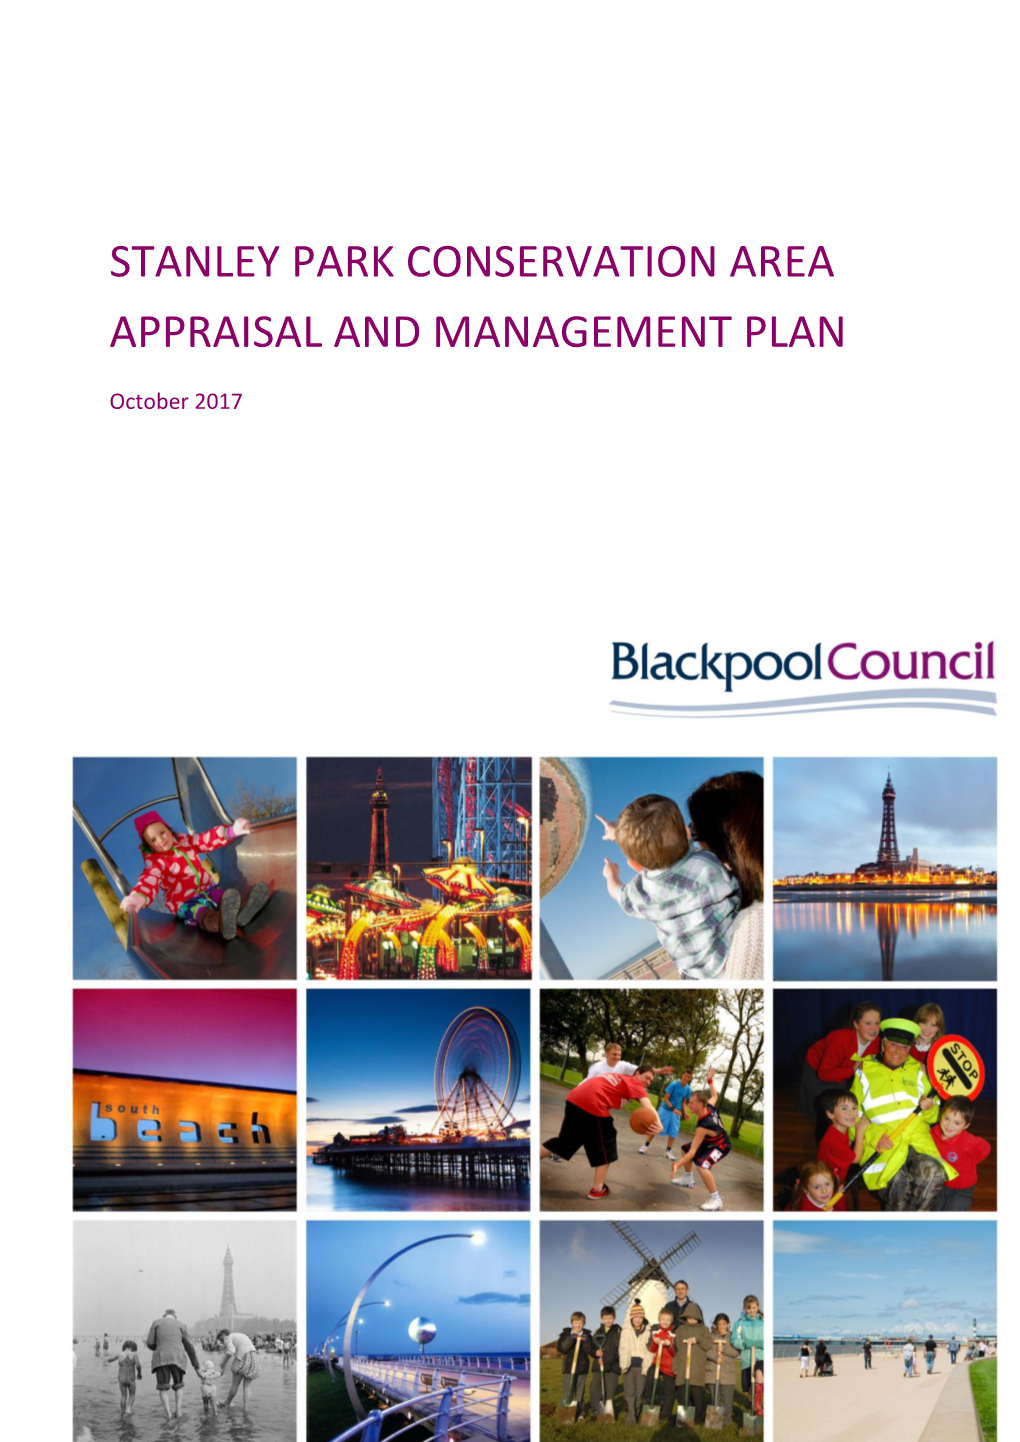 Stanley Park Conservation Area Appraisal and Management Plan